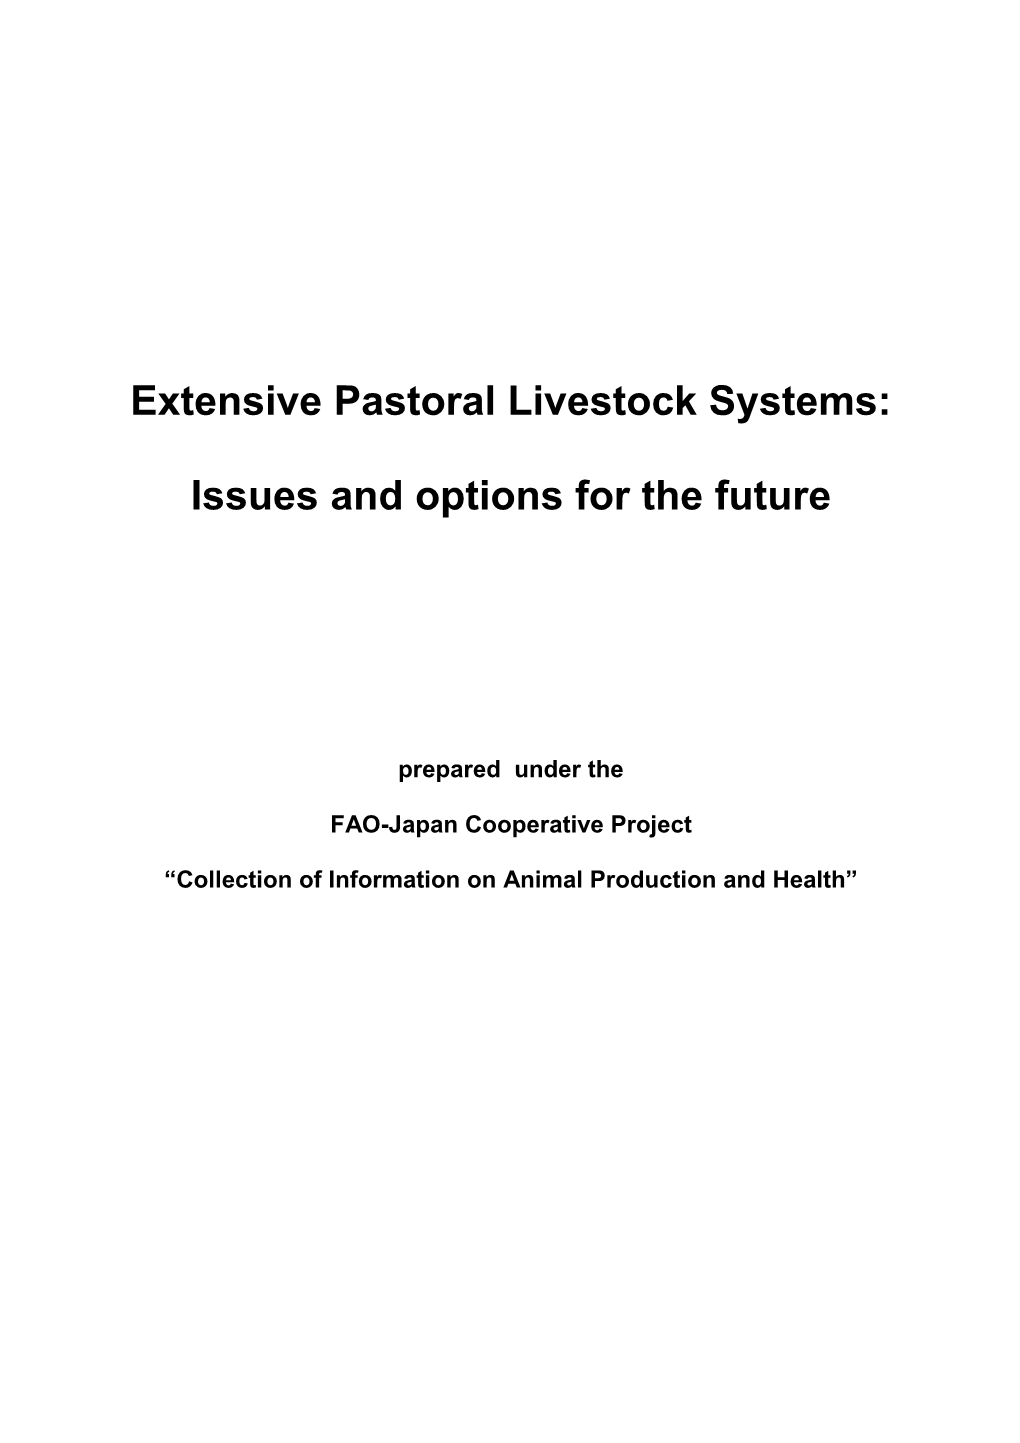 Extensive Pastoral Livestock Systems